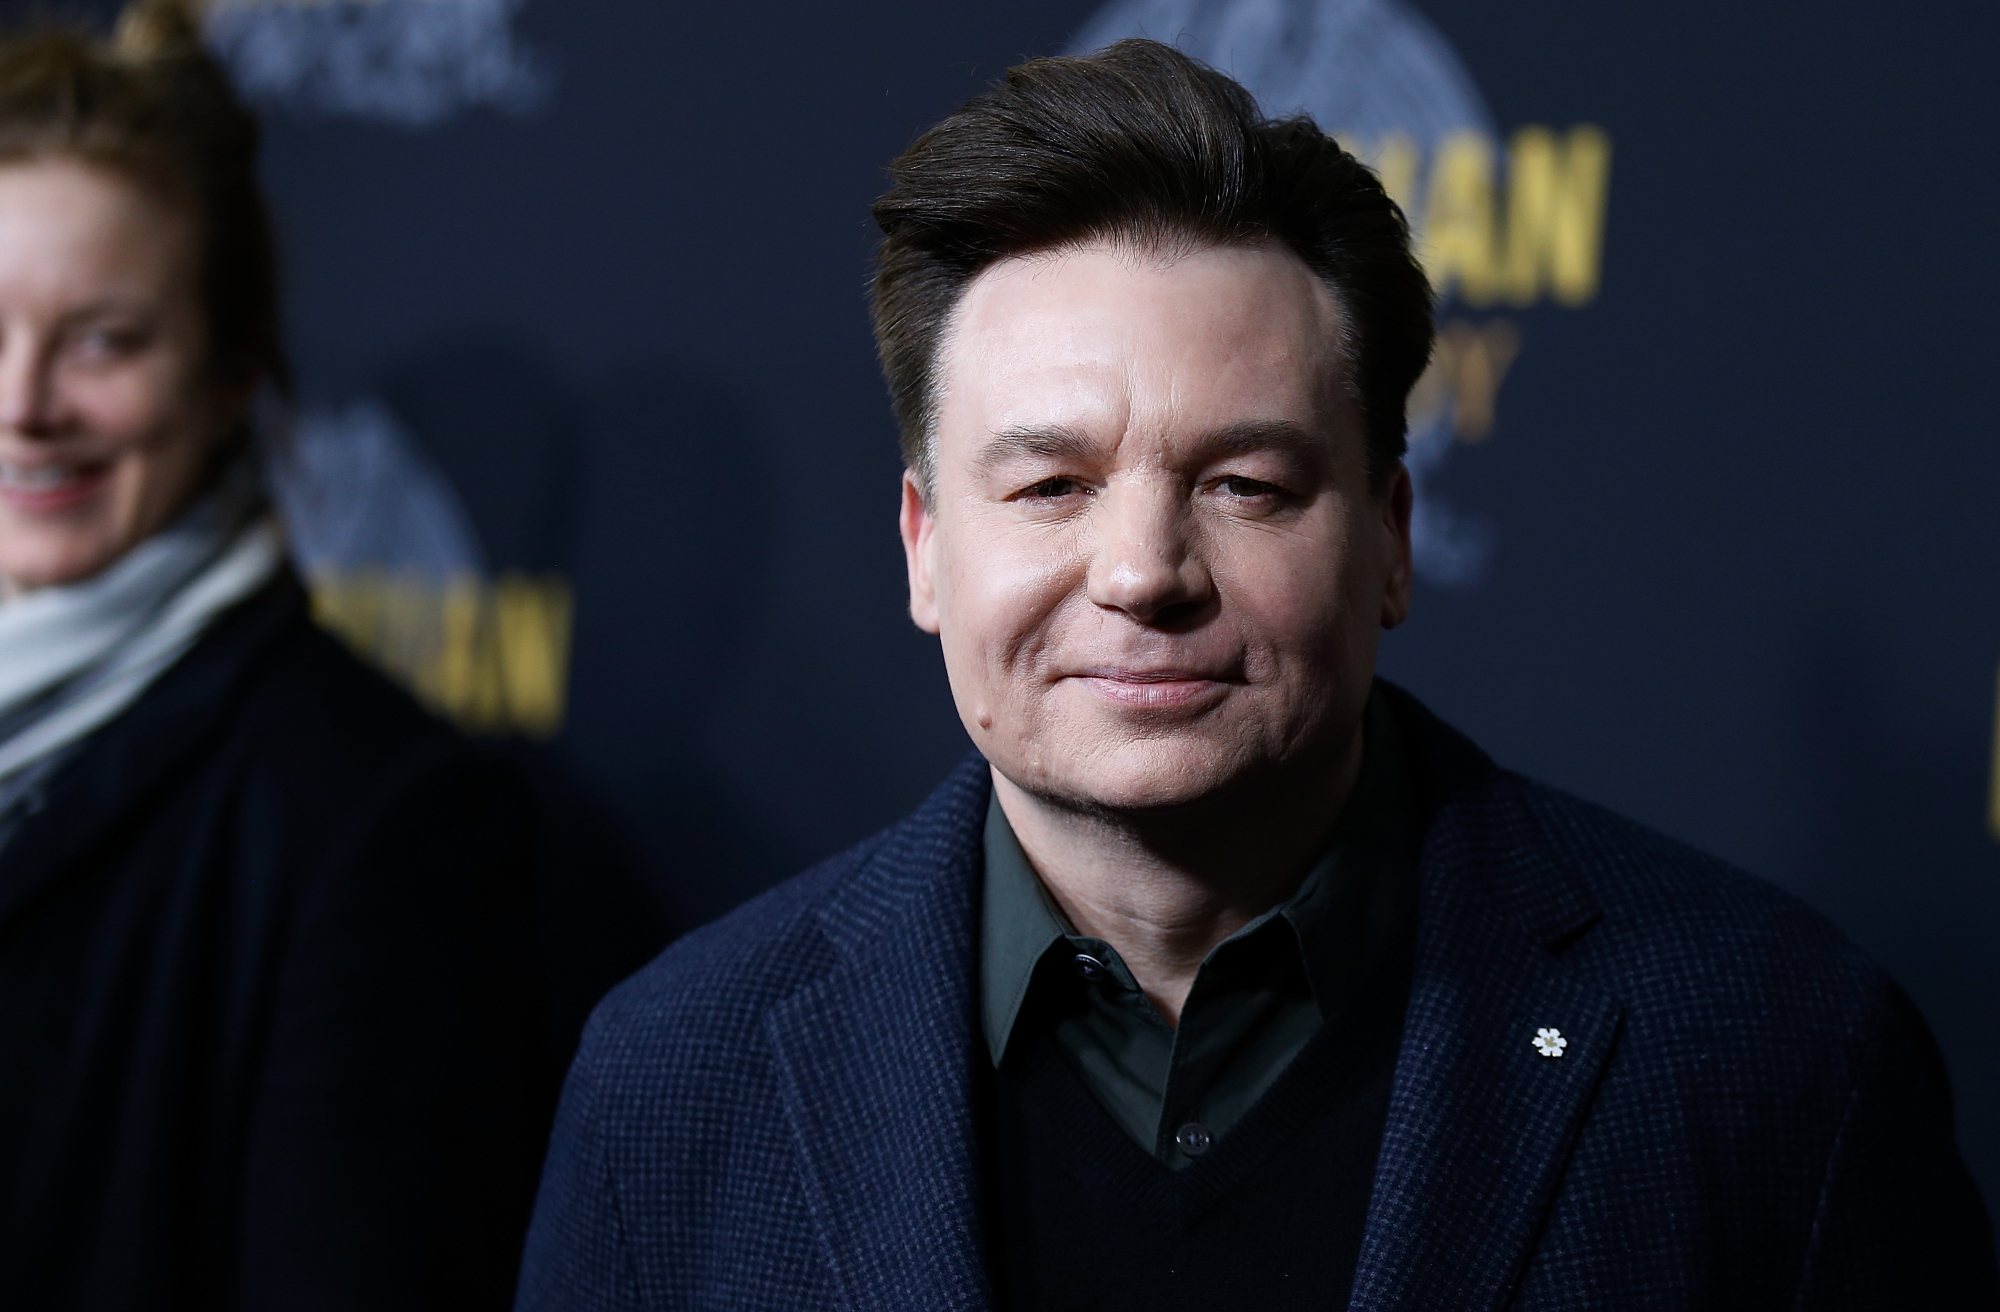 'Shrek' star Mike Myers wearing a jacket and collared shirt in front of a step and repeat